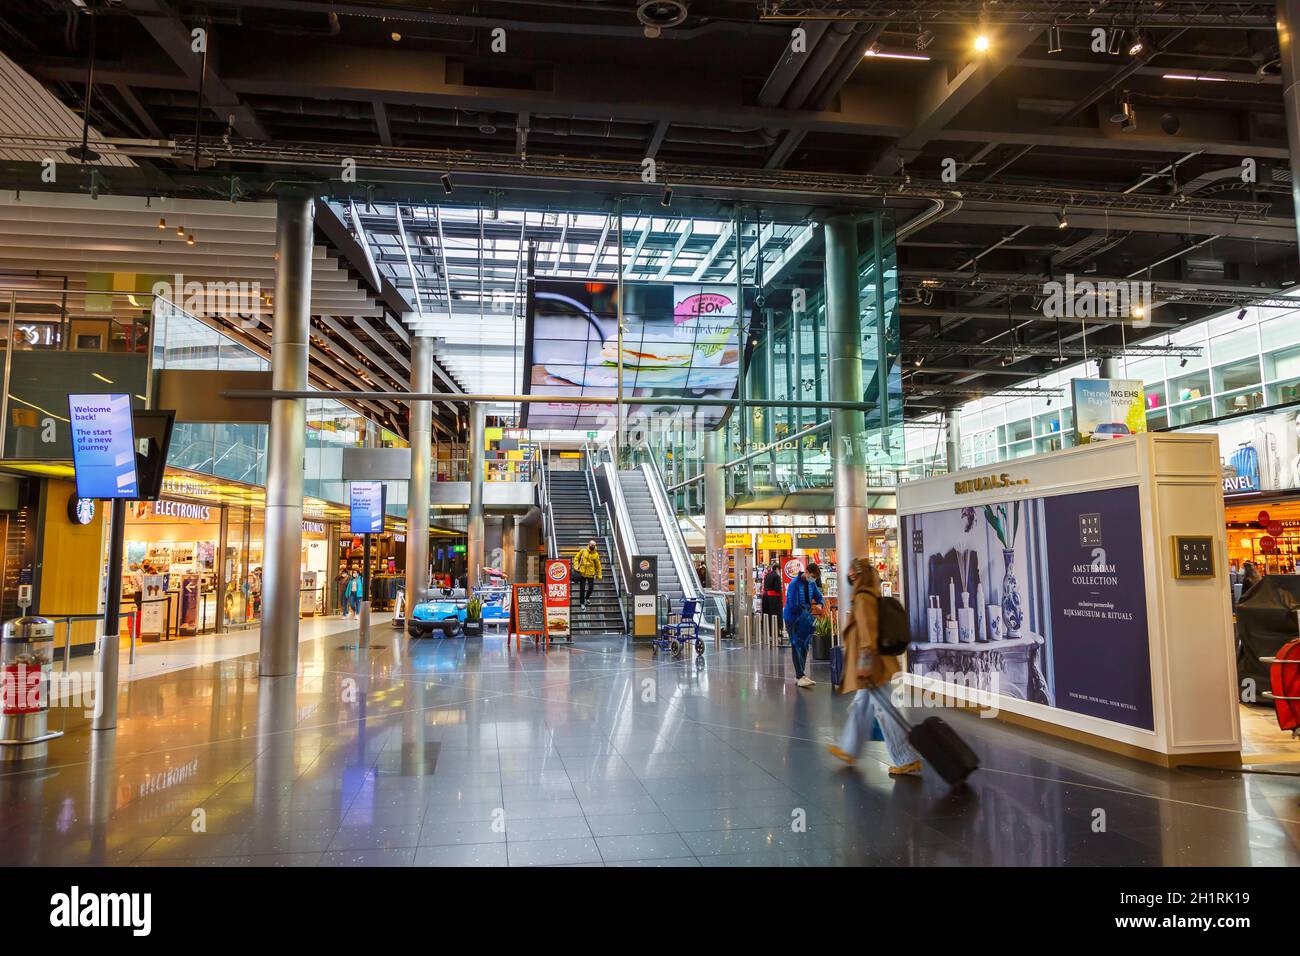 Amsterdam, Netherlands - May 21, 2021: Amsterdam Schiphol Airport Terminal in the Netherlands. Stock Photo